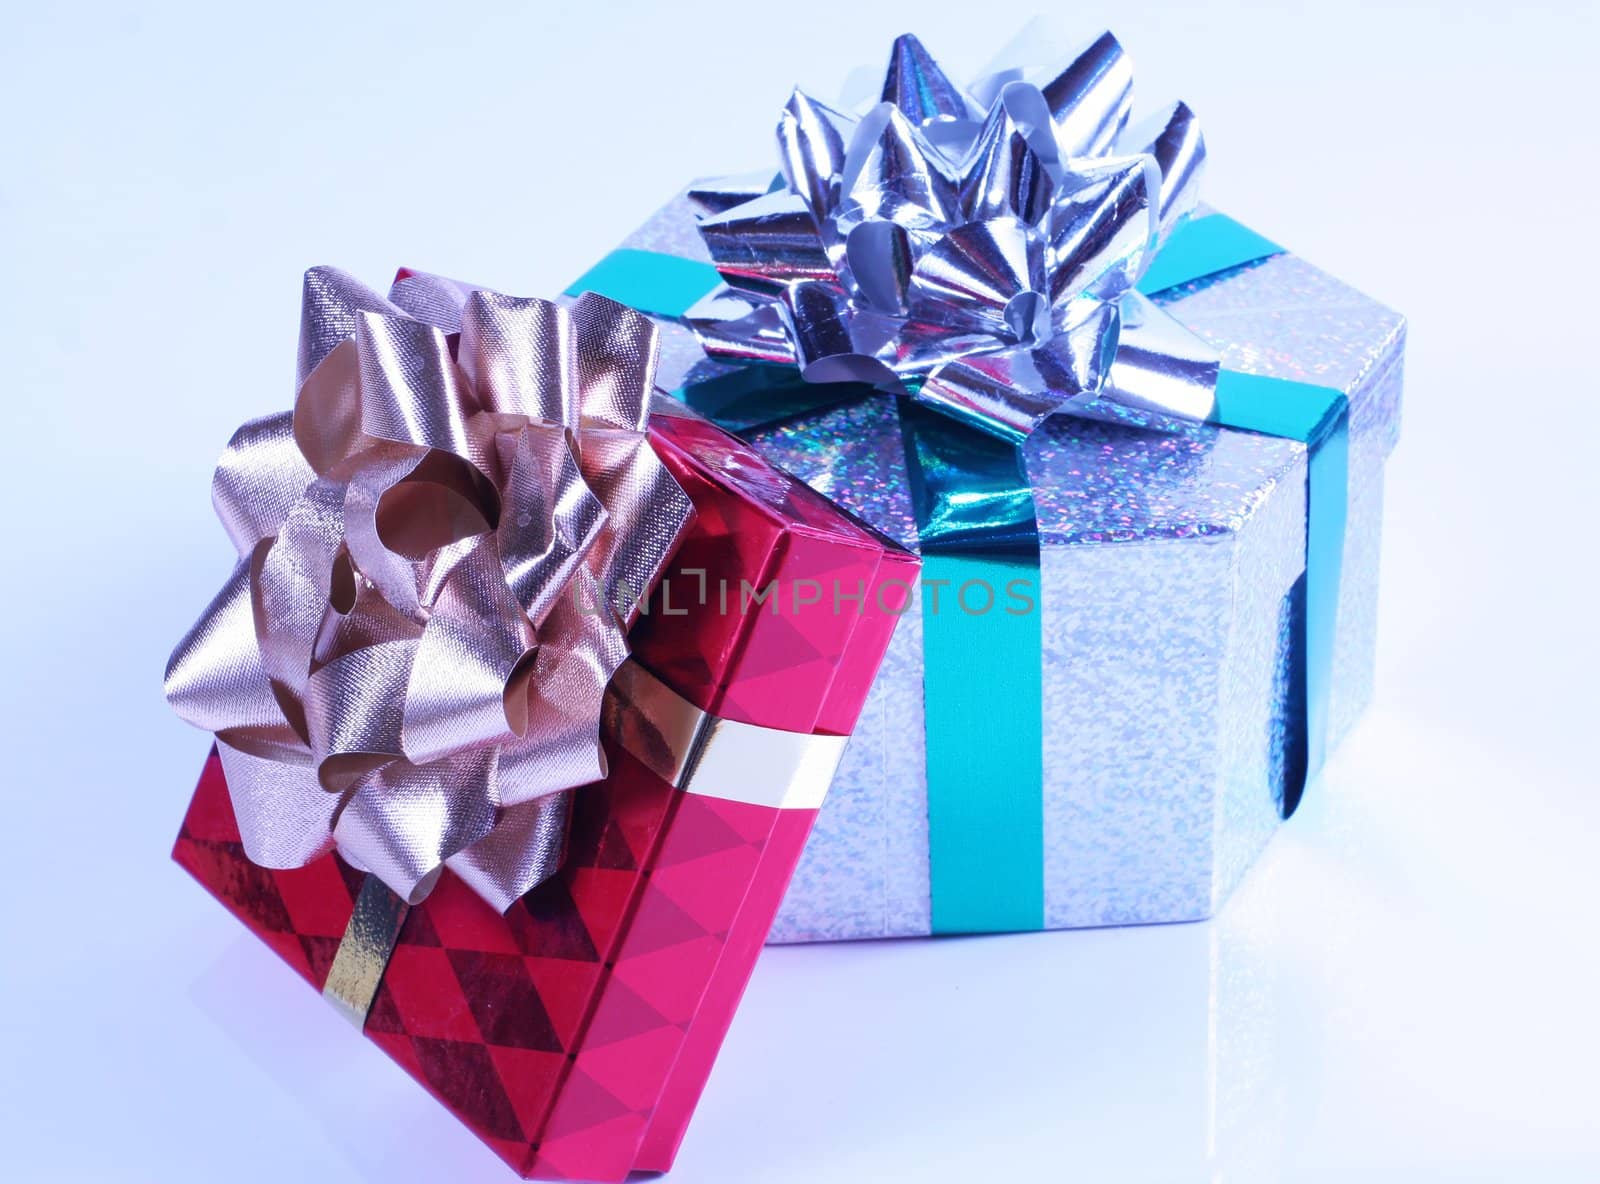 Shiny presents with ribbons and bows on white background.